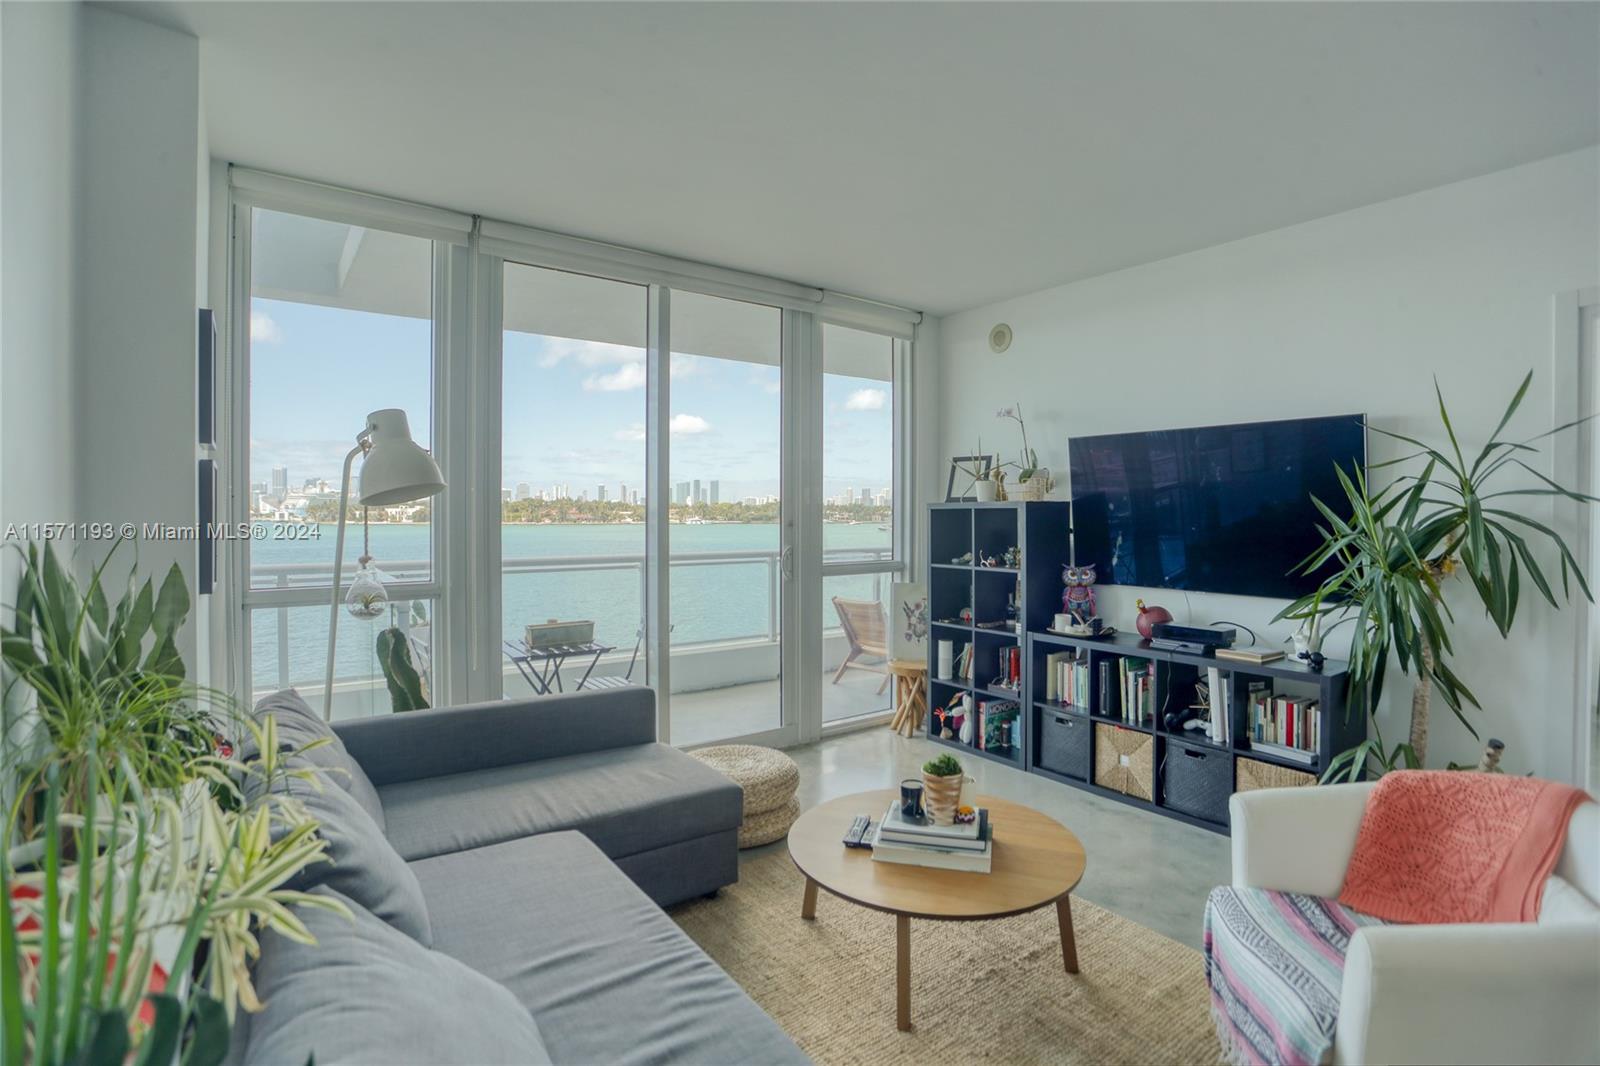 Experience Miami Beach living at its finest! This spacious 1-bedroom, 1-bathroom unit at Bentley Bay is move-in ready and boasts stunning bay views right from your private balcony.